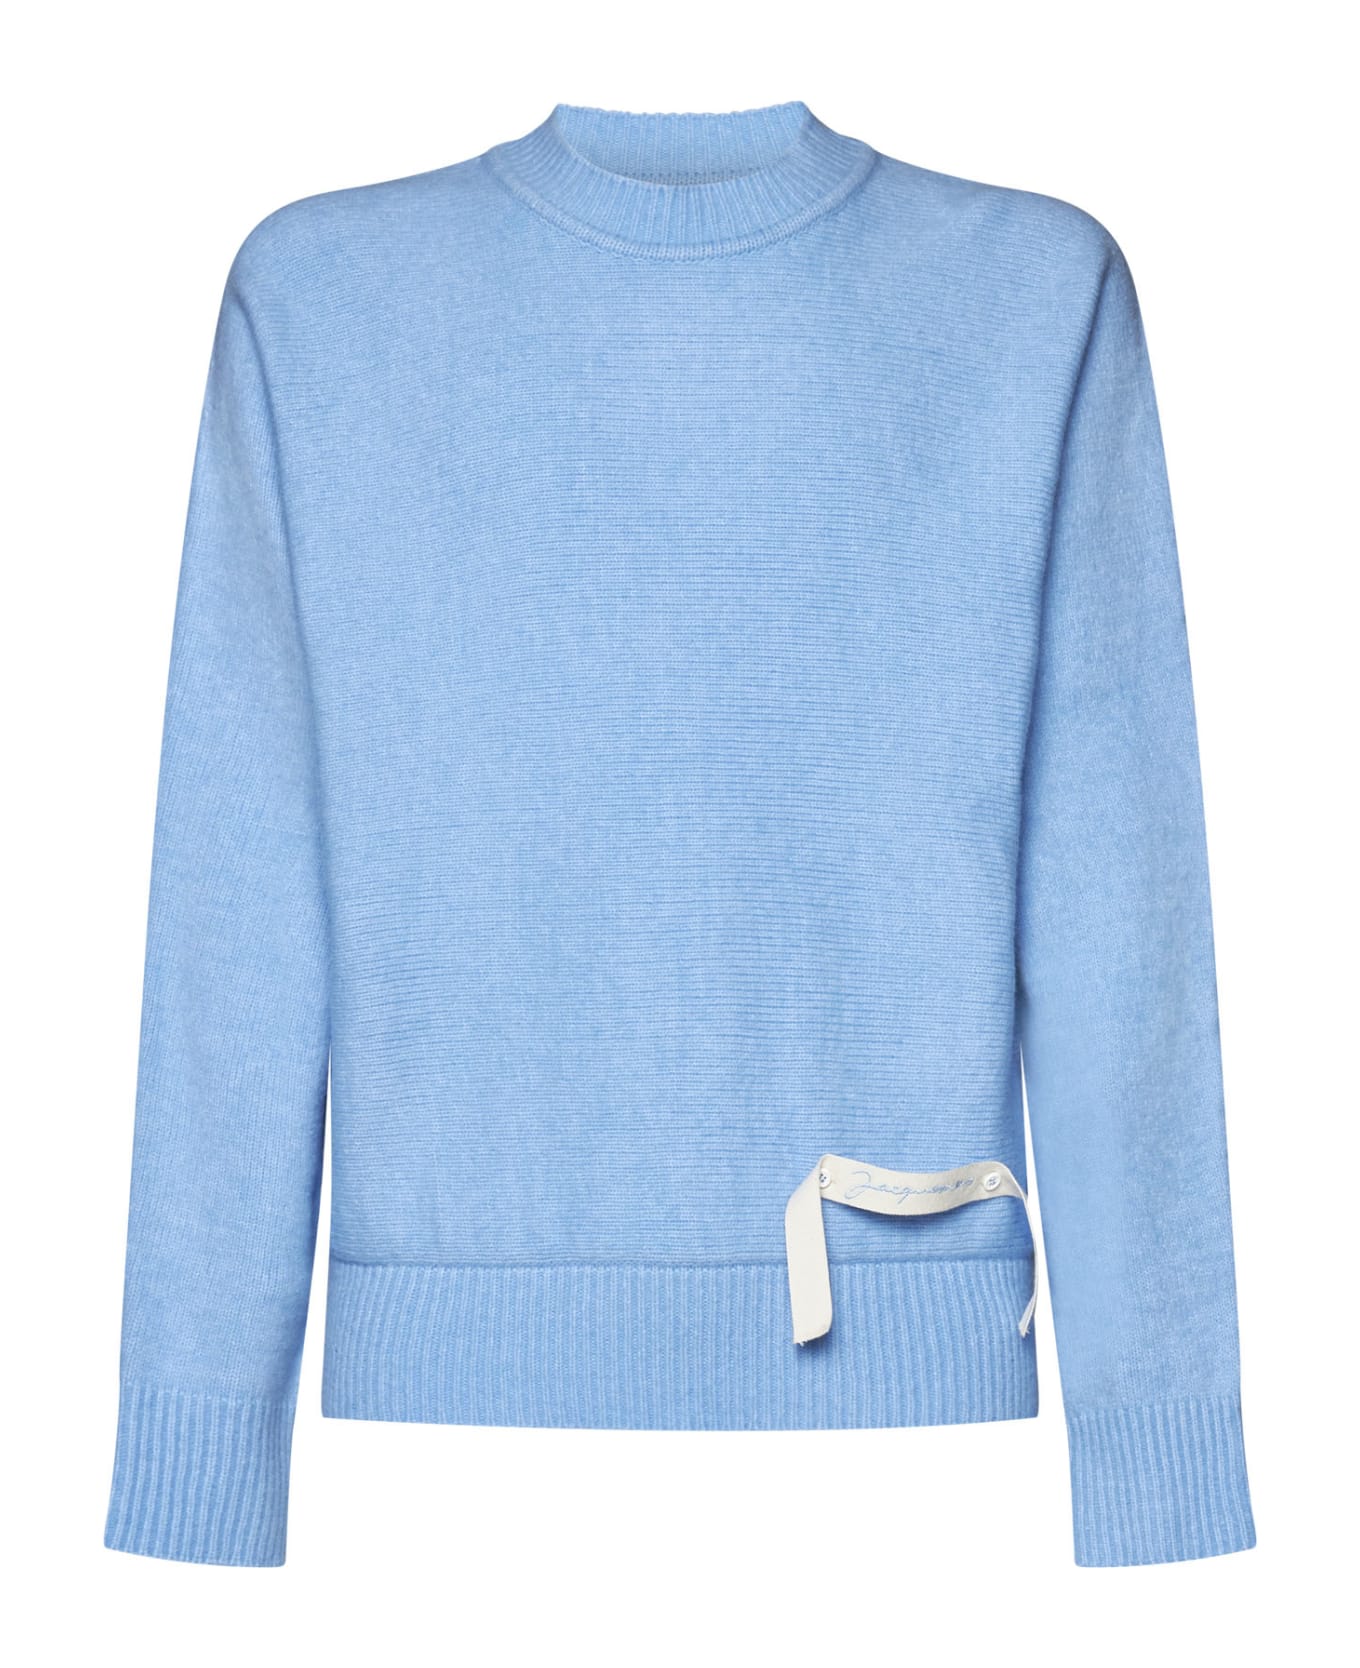 Jacquemus Sweater | italist, ALWAYS LIKE A SALE